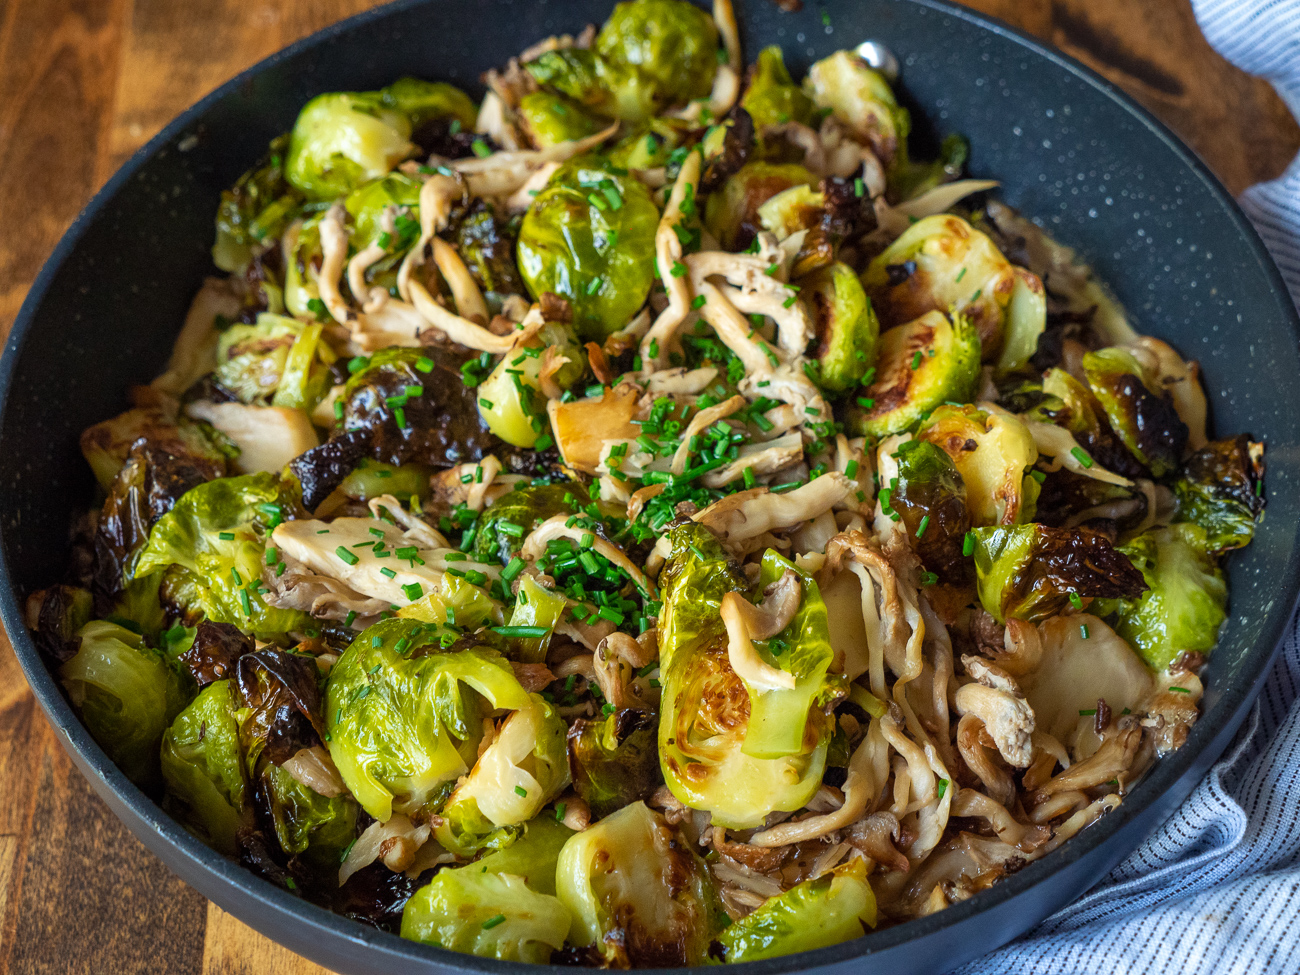 Mushroom-and-White-Wine-Brussels-Sprouts-Horizontal-10